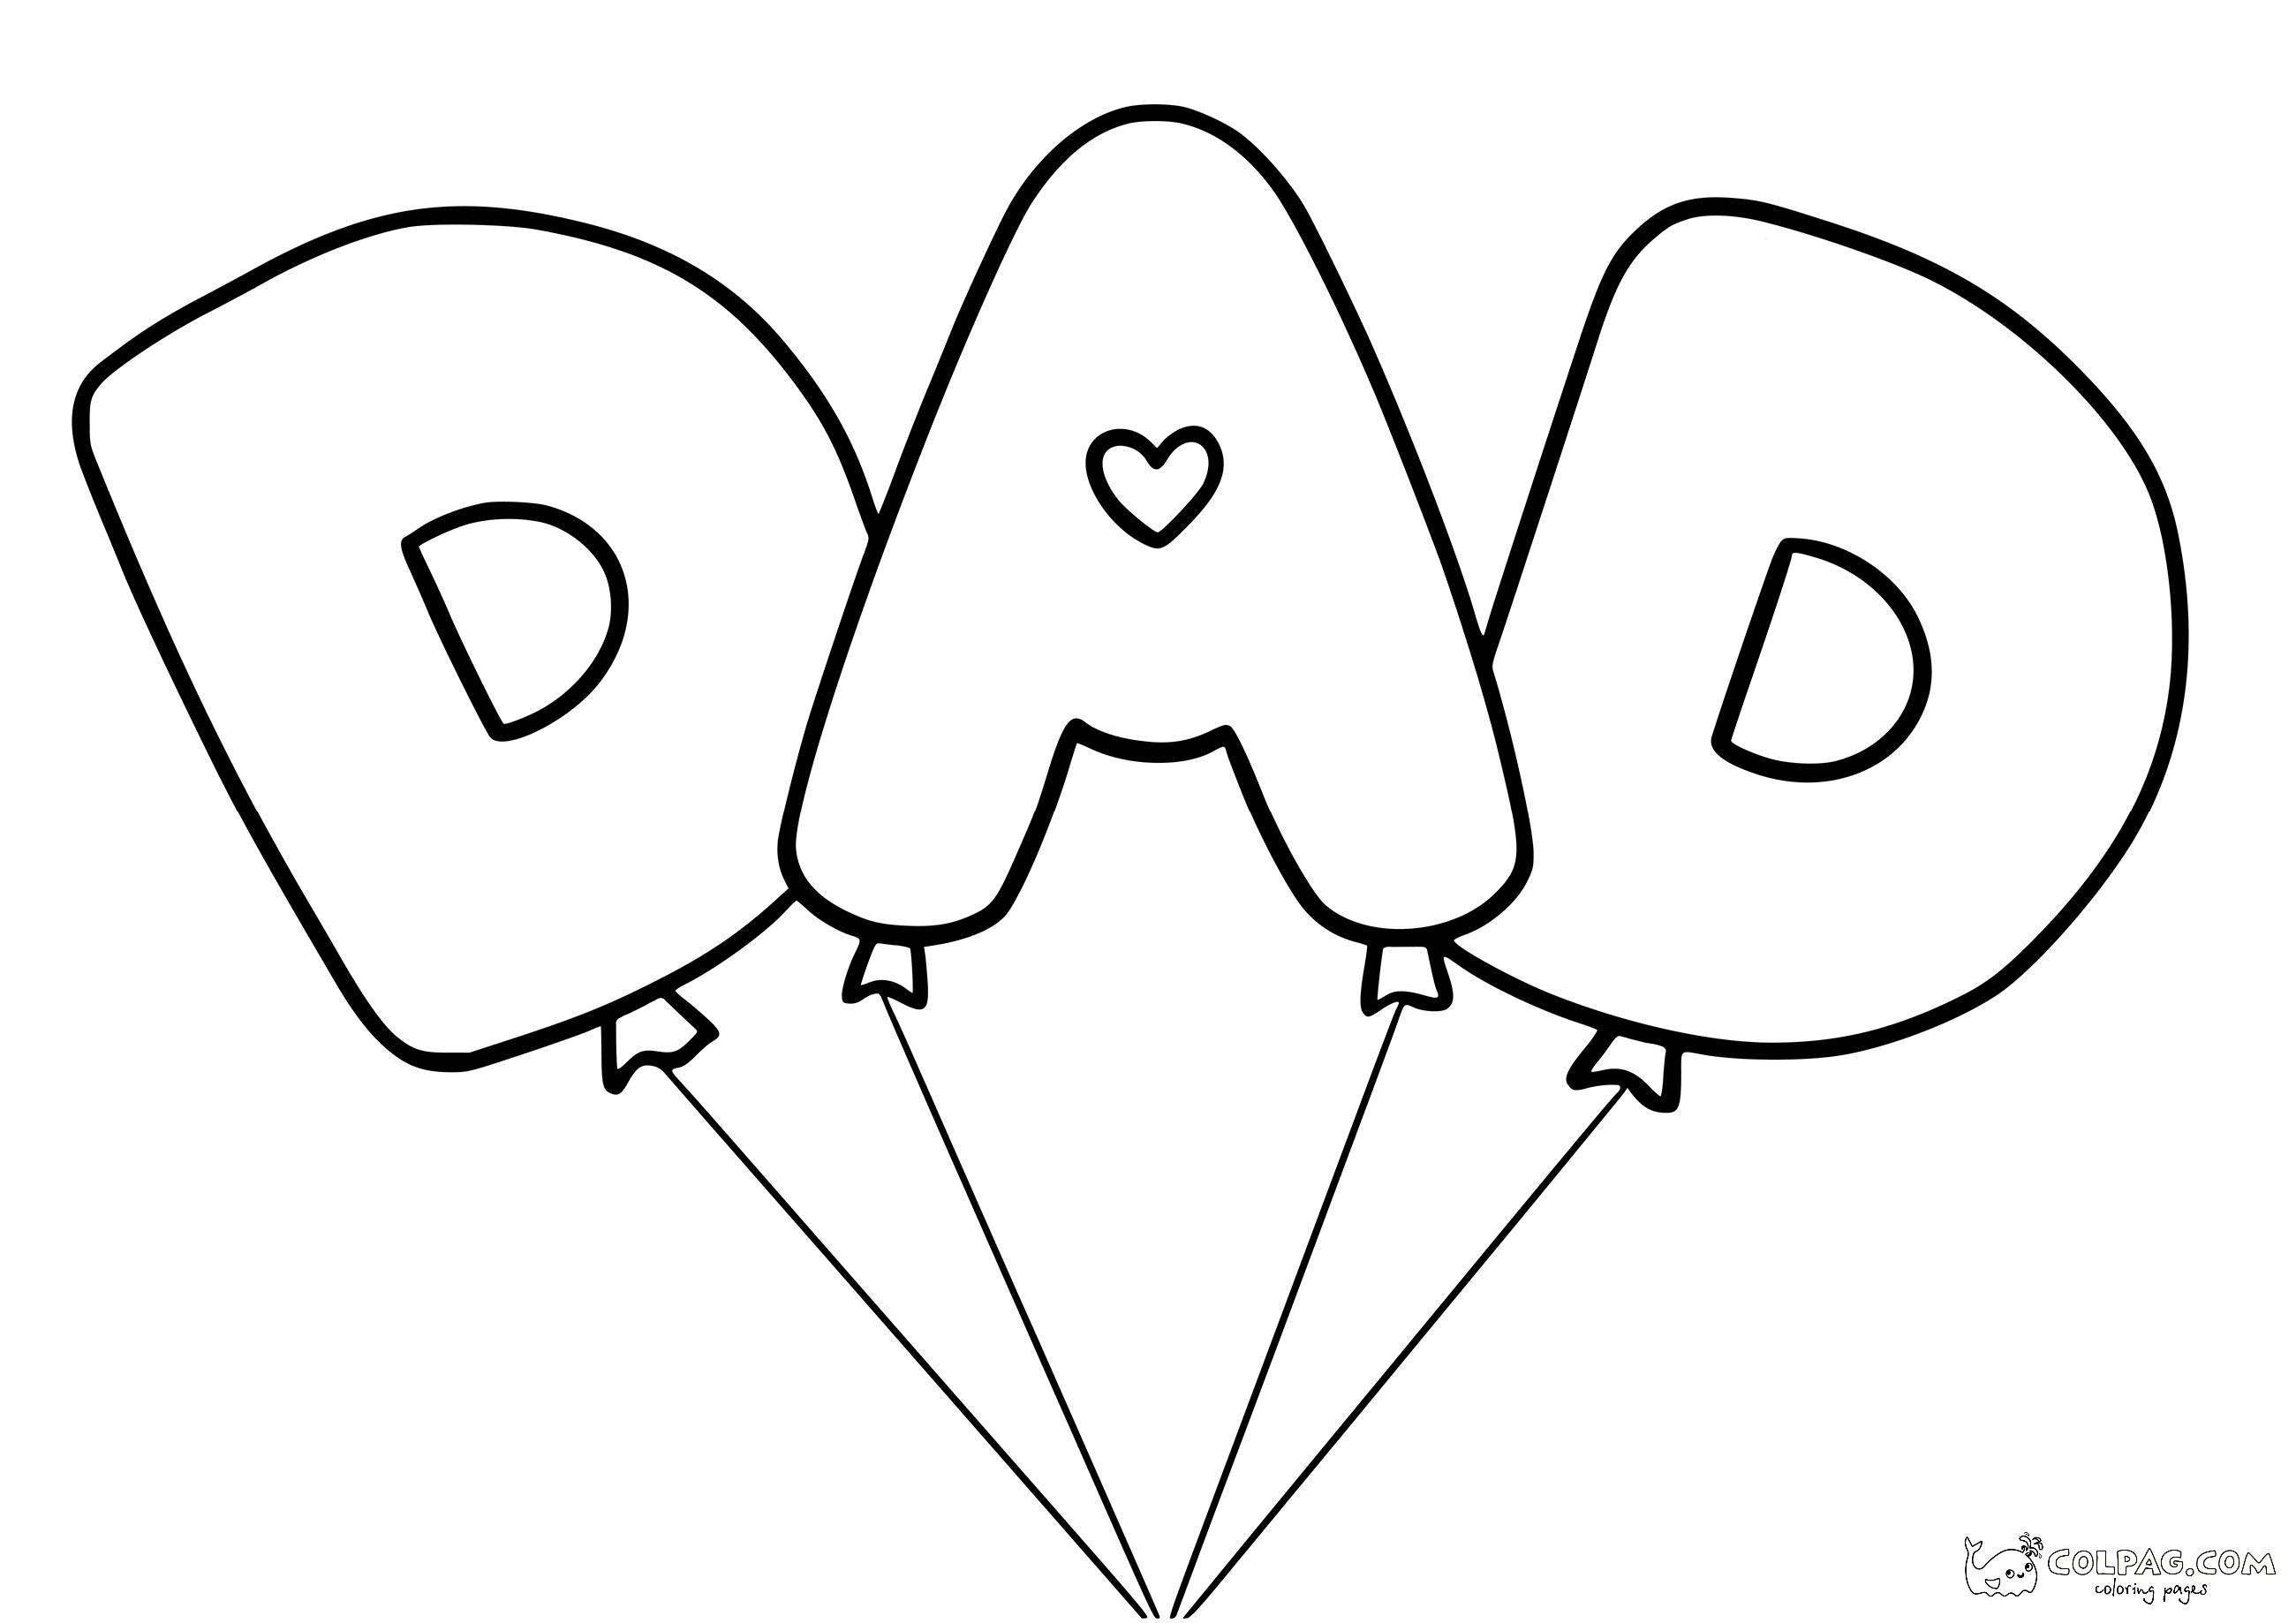 35-dad-flying-baloons-coloring-page-colpag-35